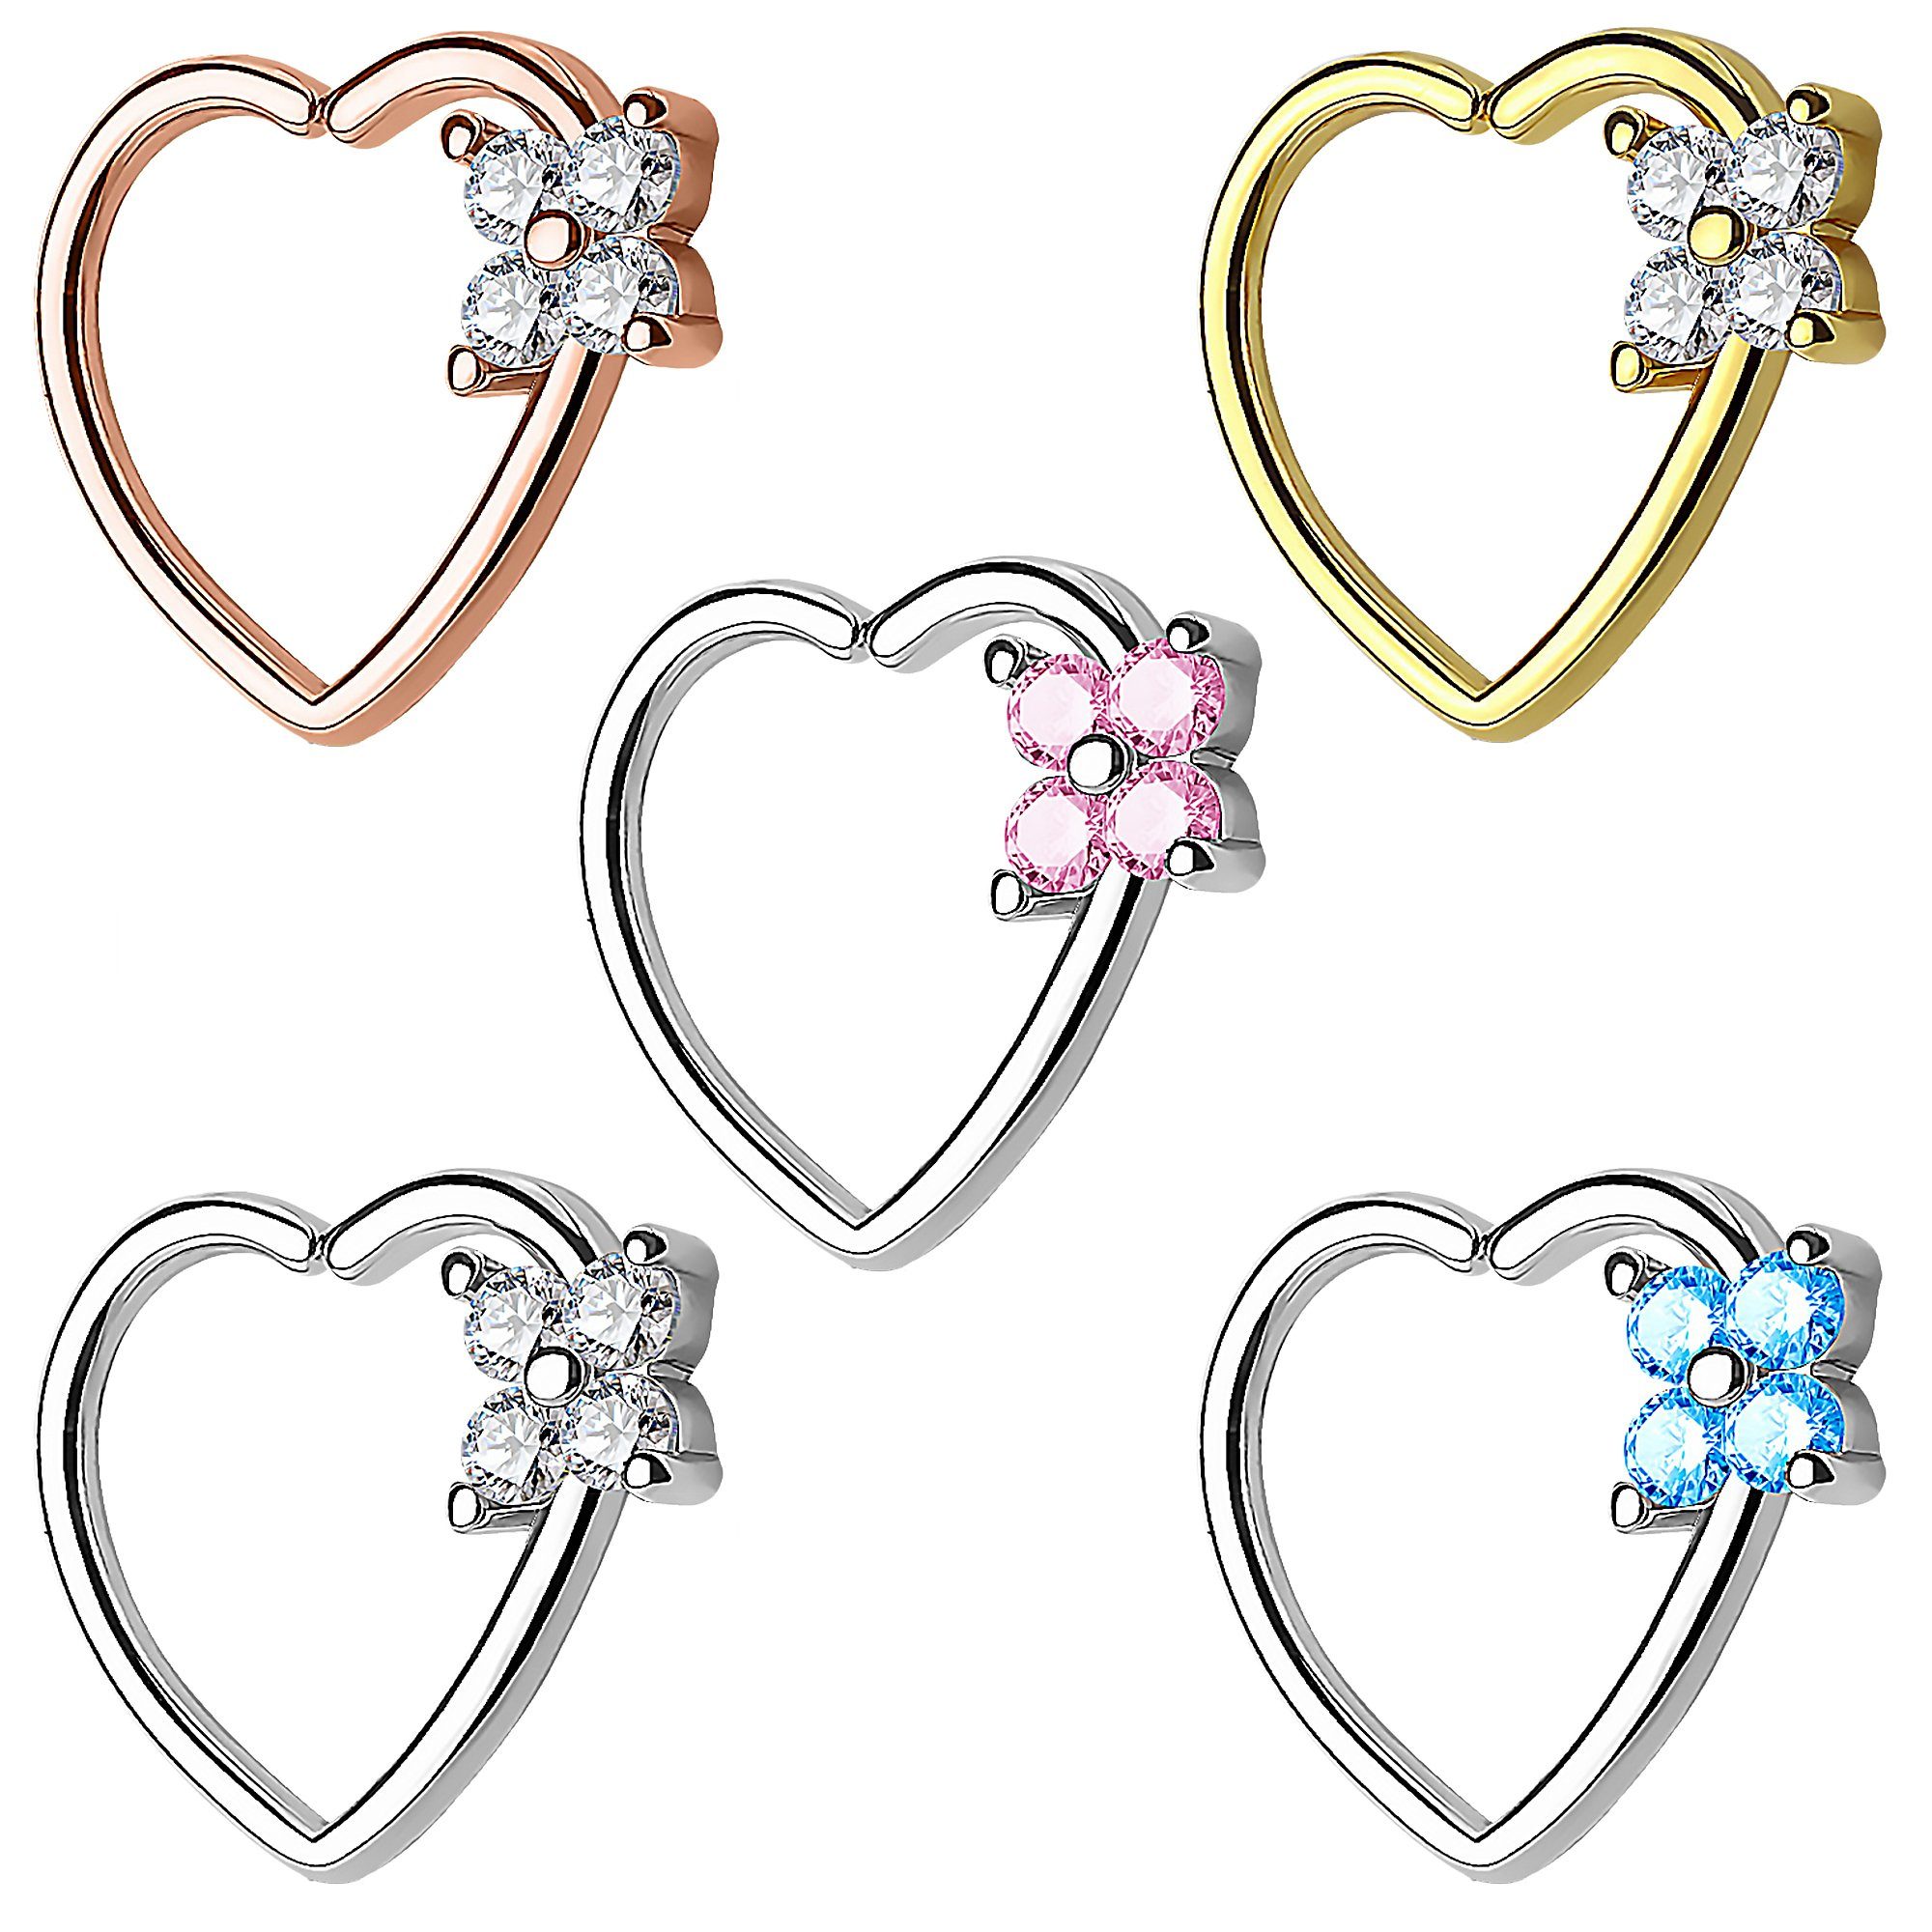 Ohr Kleeblatt Kristall Knorpel Strass Blume, Ring Ohrpiercing Herz Clear Silber Helix Piercing-Set Taffstyle Piercing - Cartilage Ring Tragus Continuous